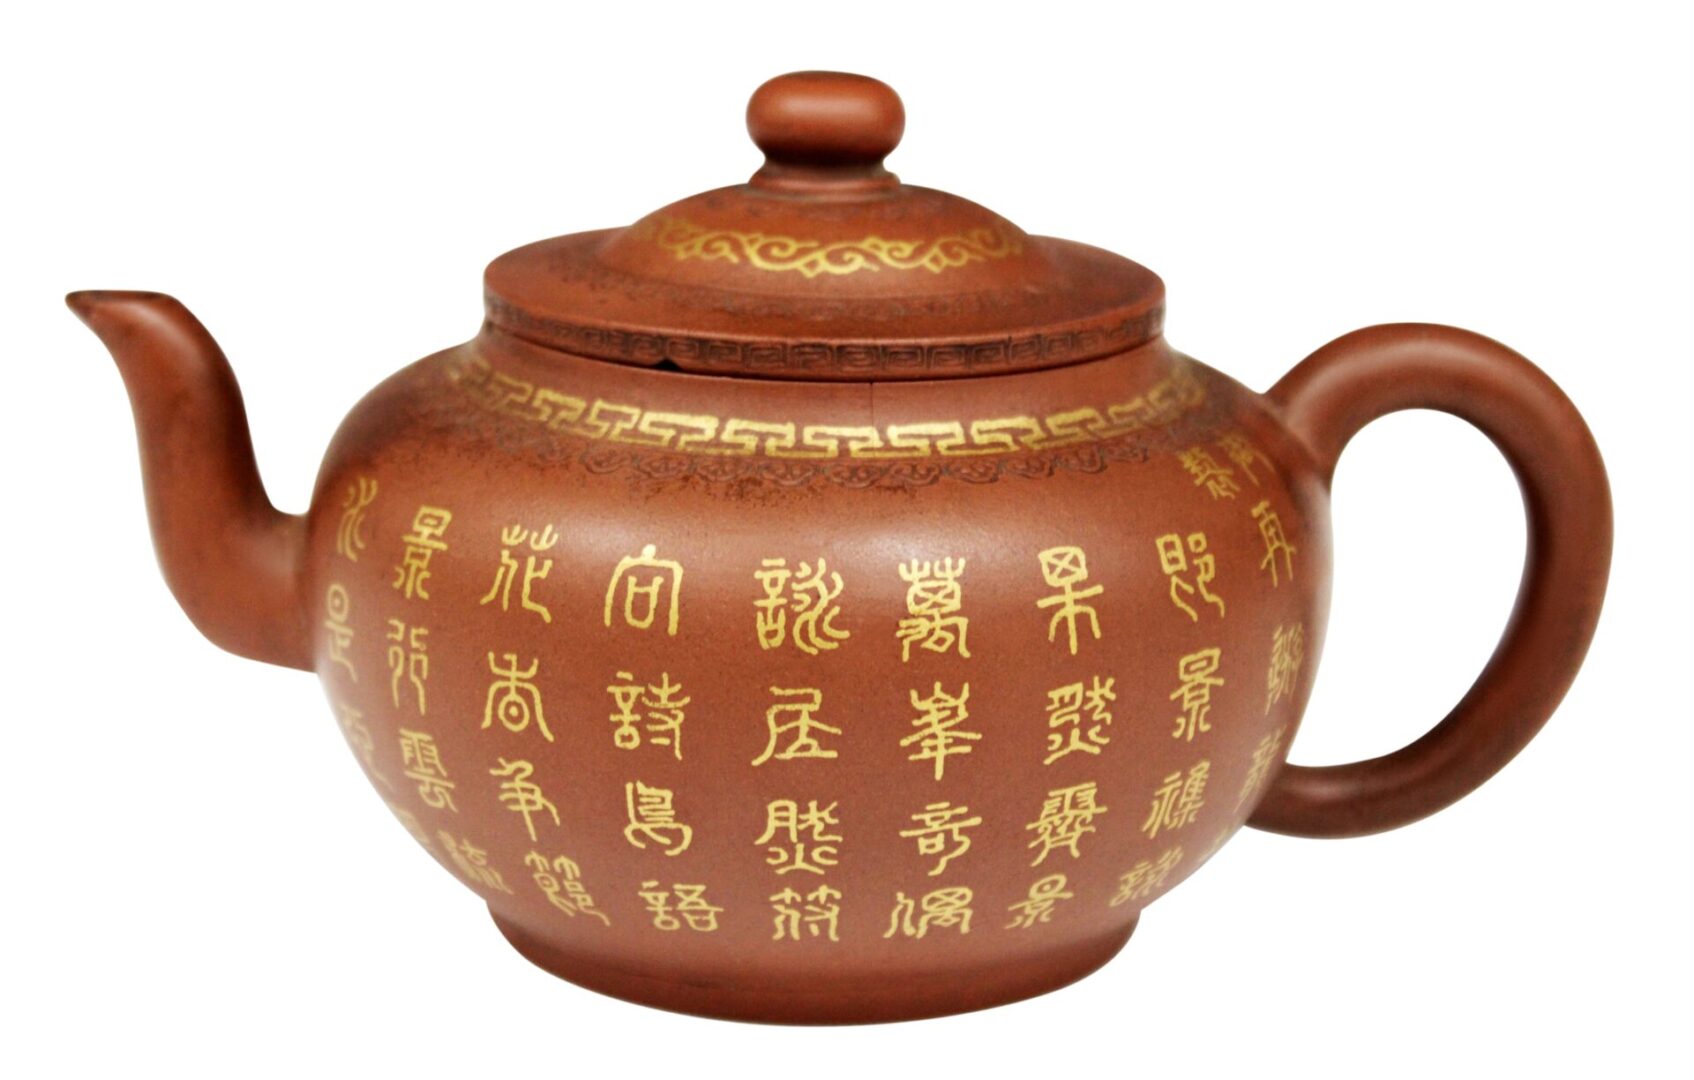 A brown teapot with gold writing on it.